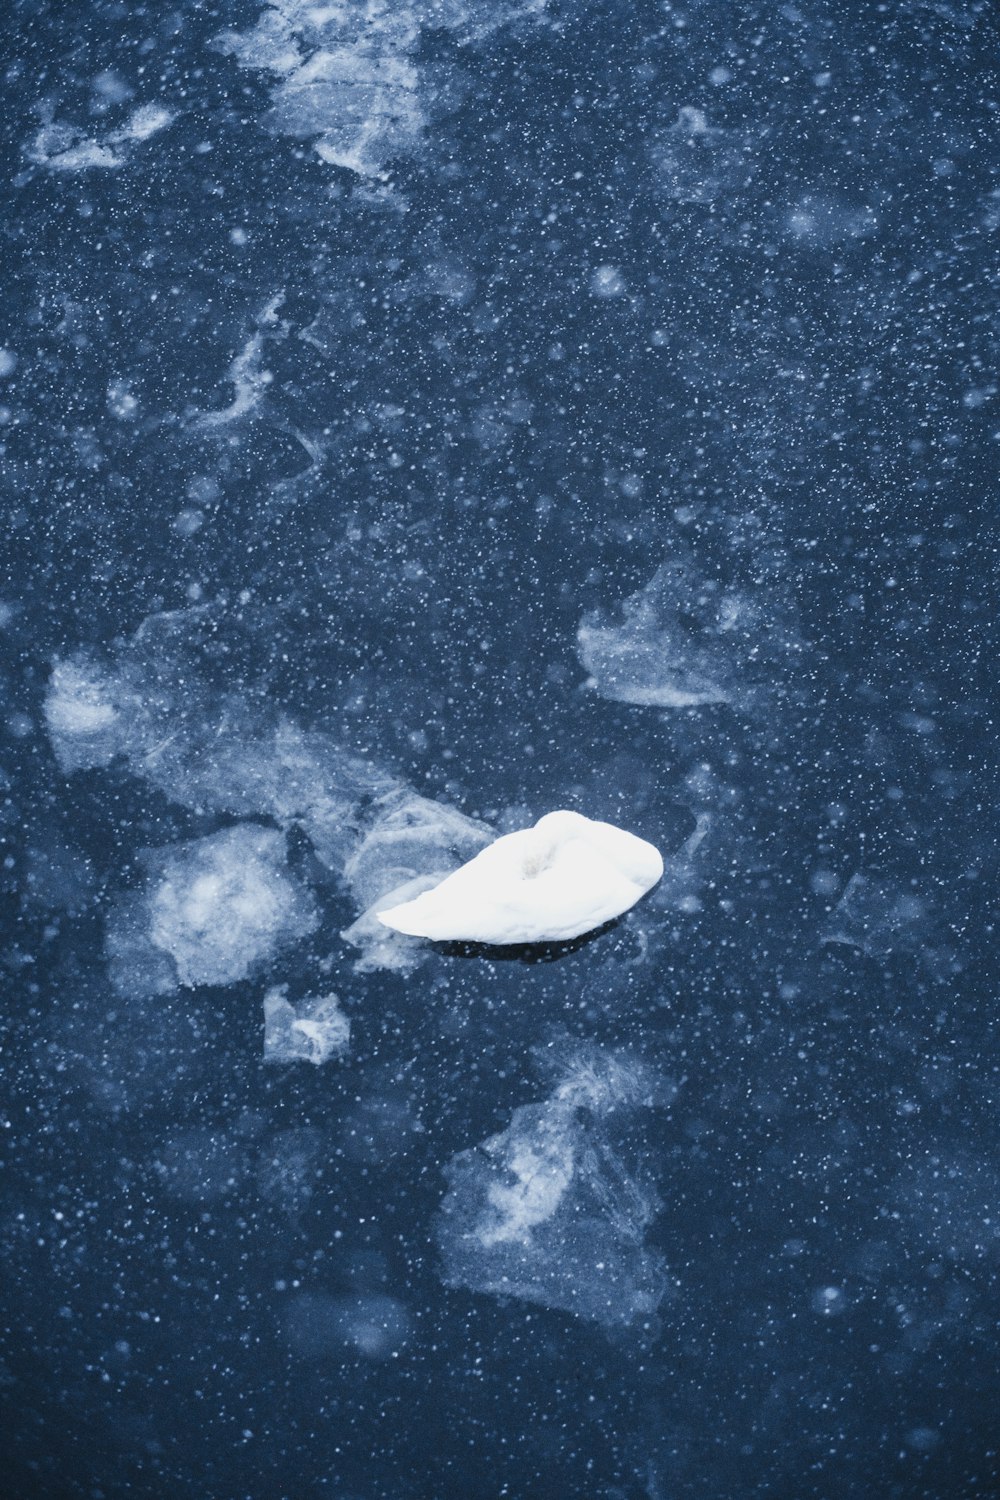 a white object floating on top of a body of water